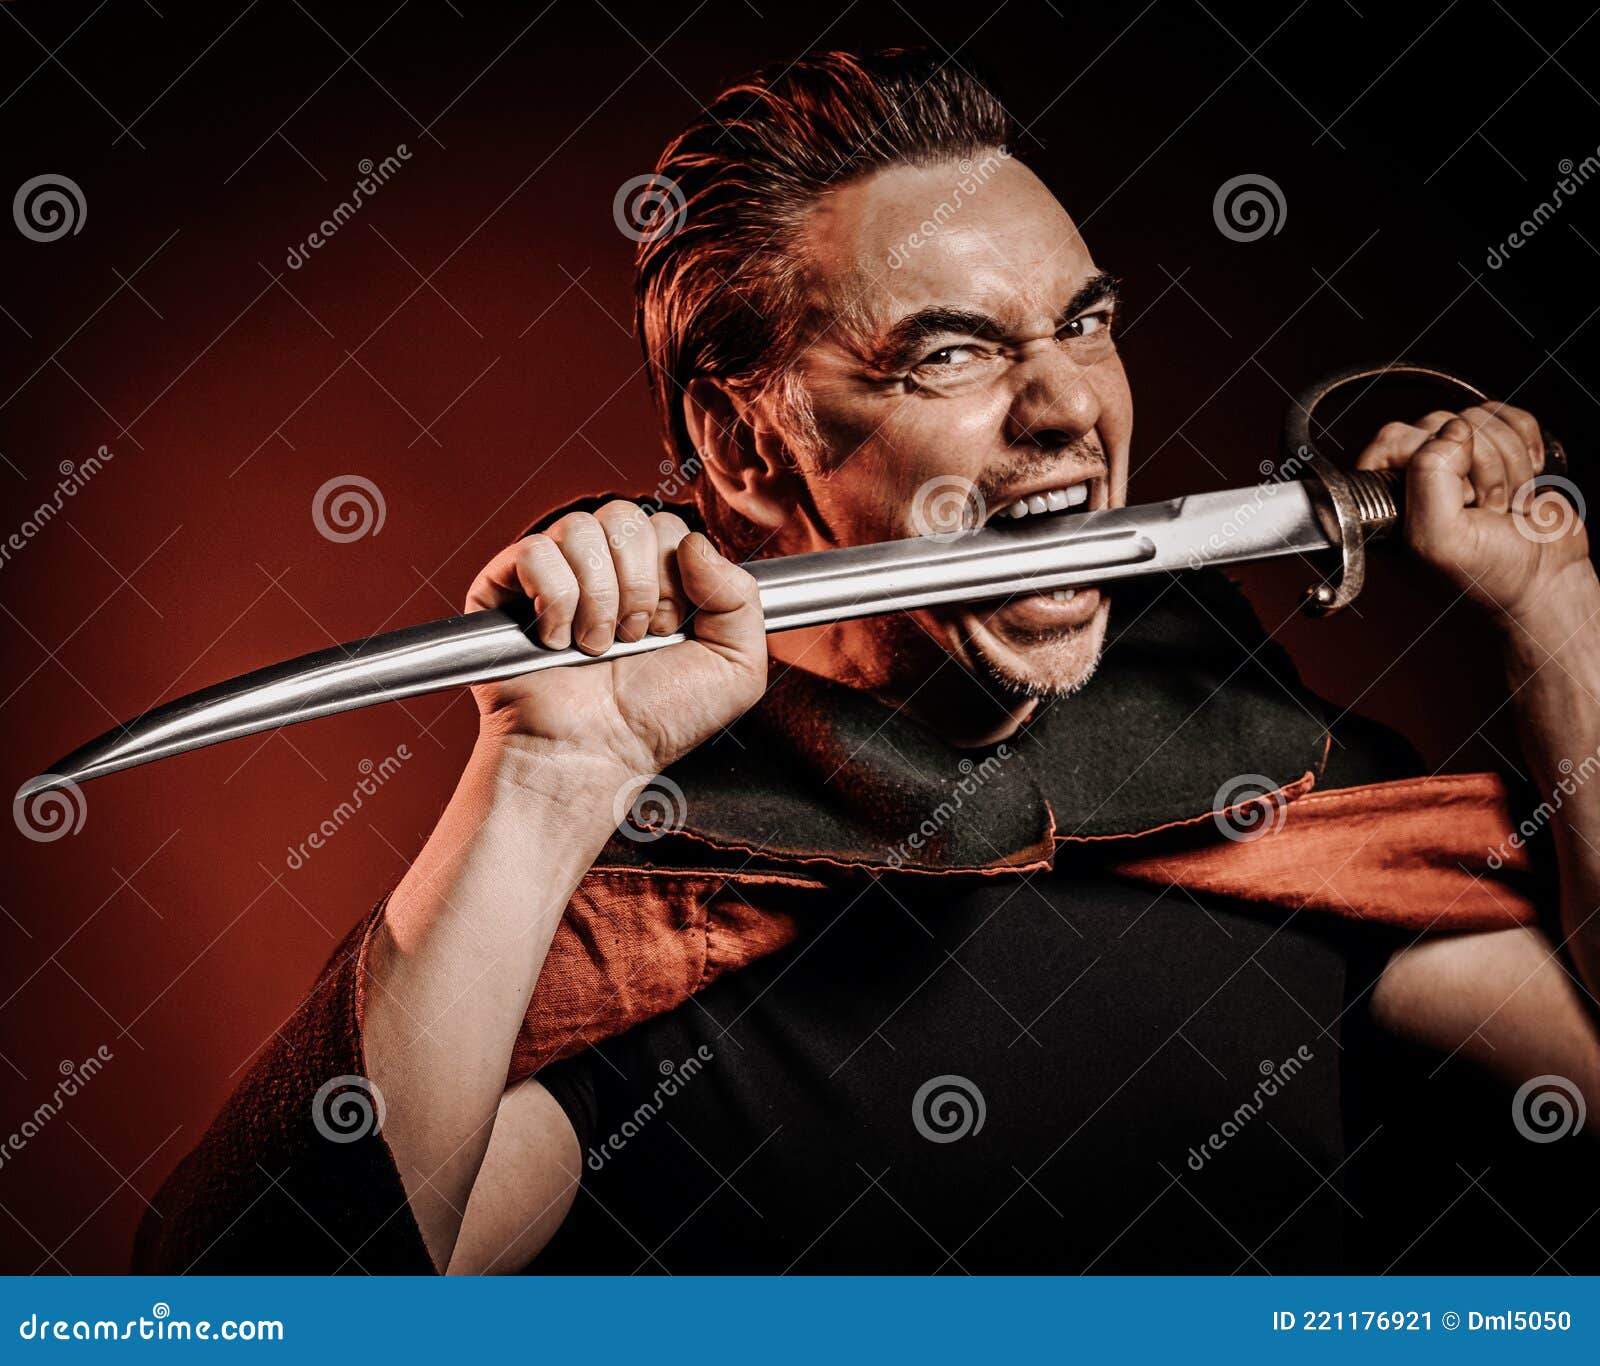 portrait of strong courage fervor man warrior in cape holding sabre, sword in his mouth, ready to fight over red